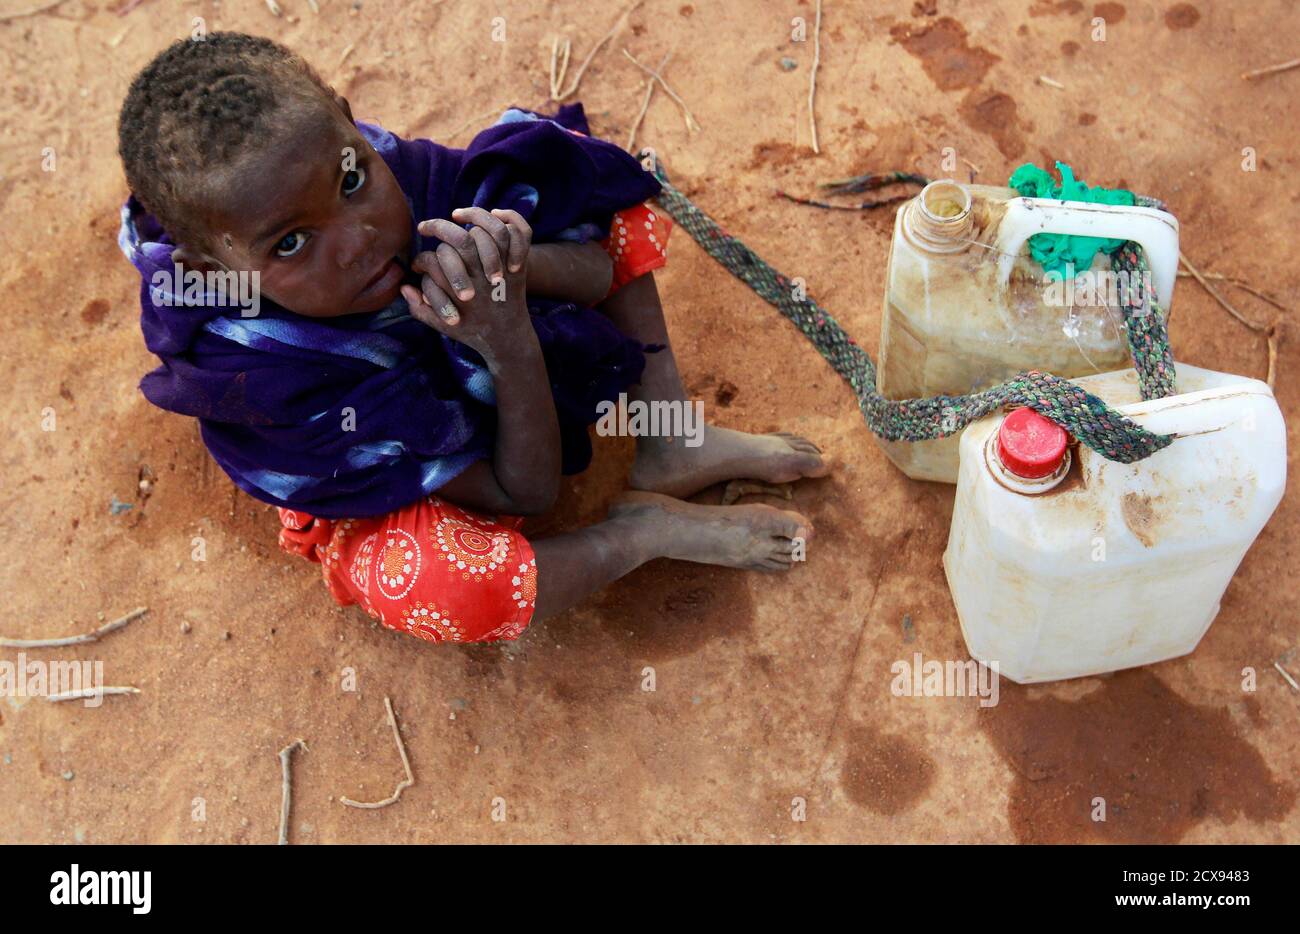 A Somali refugee girl waits for her turn to collect water from a tank at the Ifo extension refugee camp in Dadaab, near the Kenya-Somalia border, July 31, 2011. The whole of drought- and conflict-wracked southern Somalia is heading into famine as the Horn of Africa food crisis deepens, the United Nations said. REUTERS/Thomas Mukoya (KENYA - Tags: SOCIETY CIVIL UNREST DISASTER ENVIRONMENT) Stock Photo